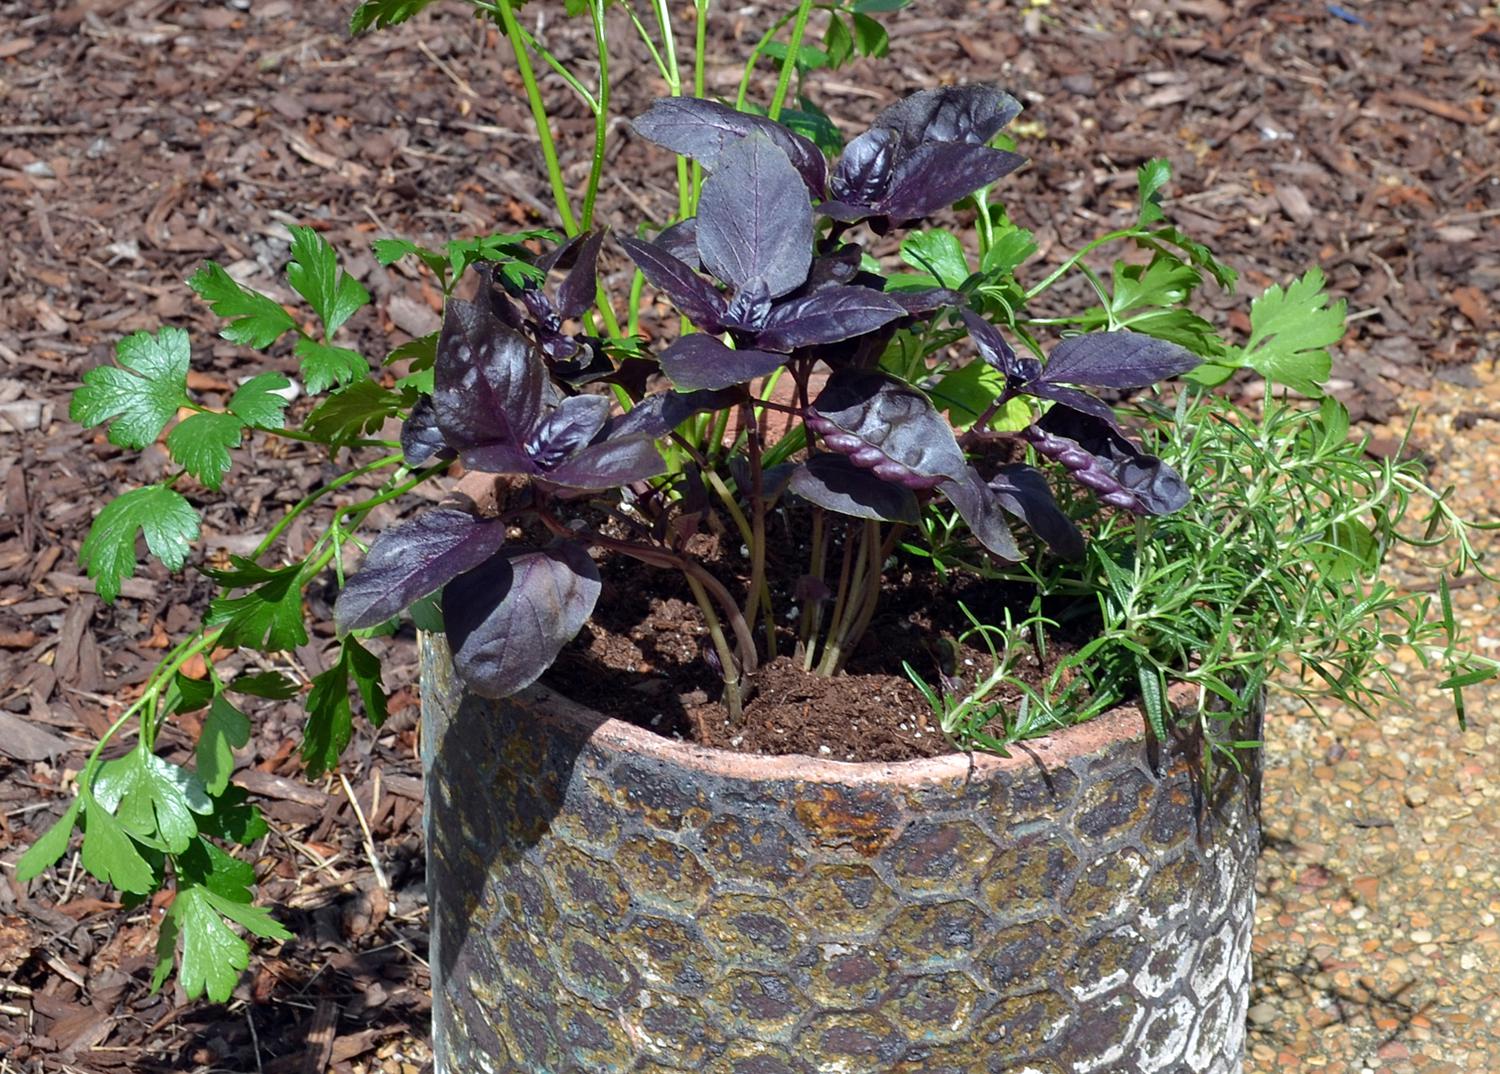 Green and purple herbs grow in a garden container.